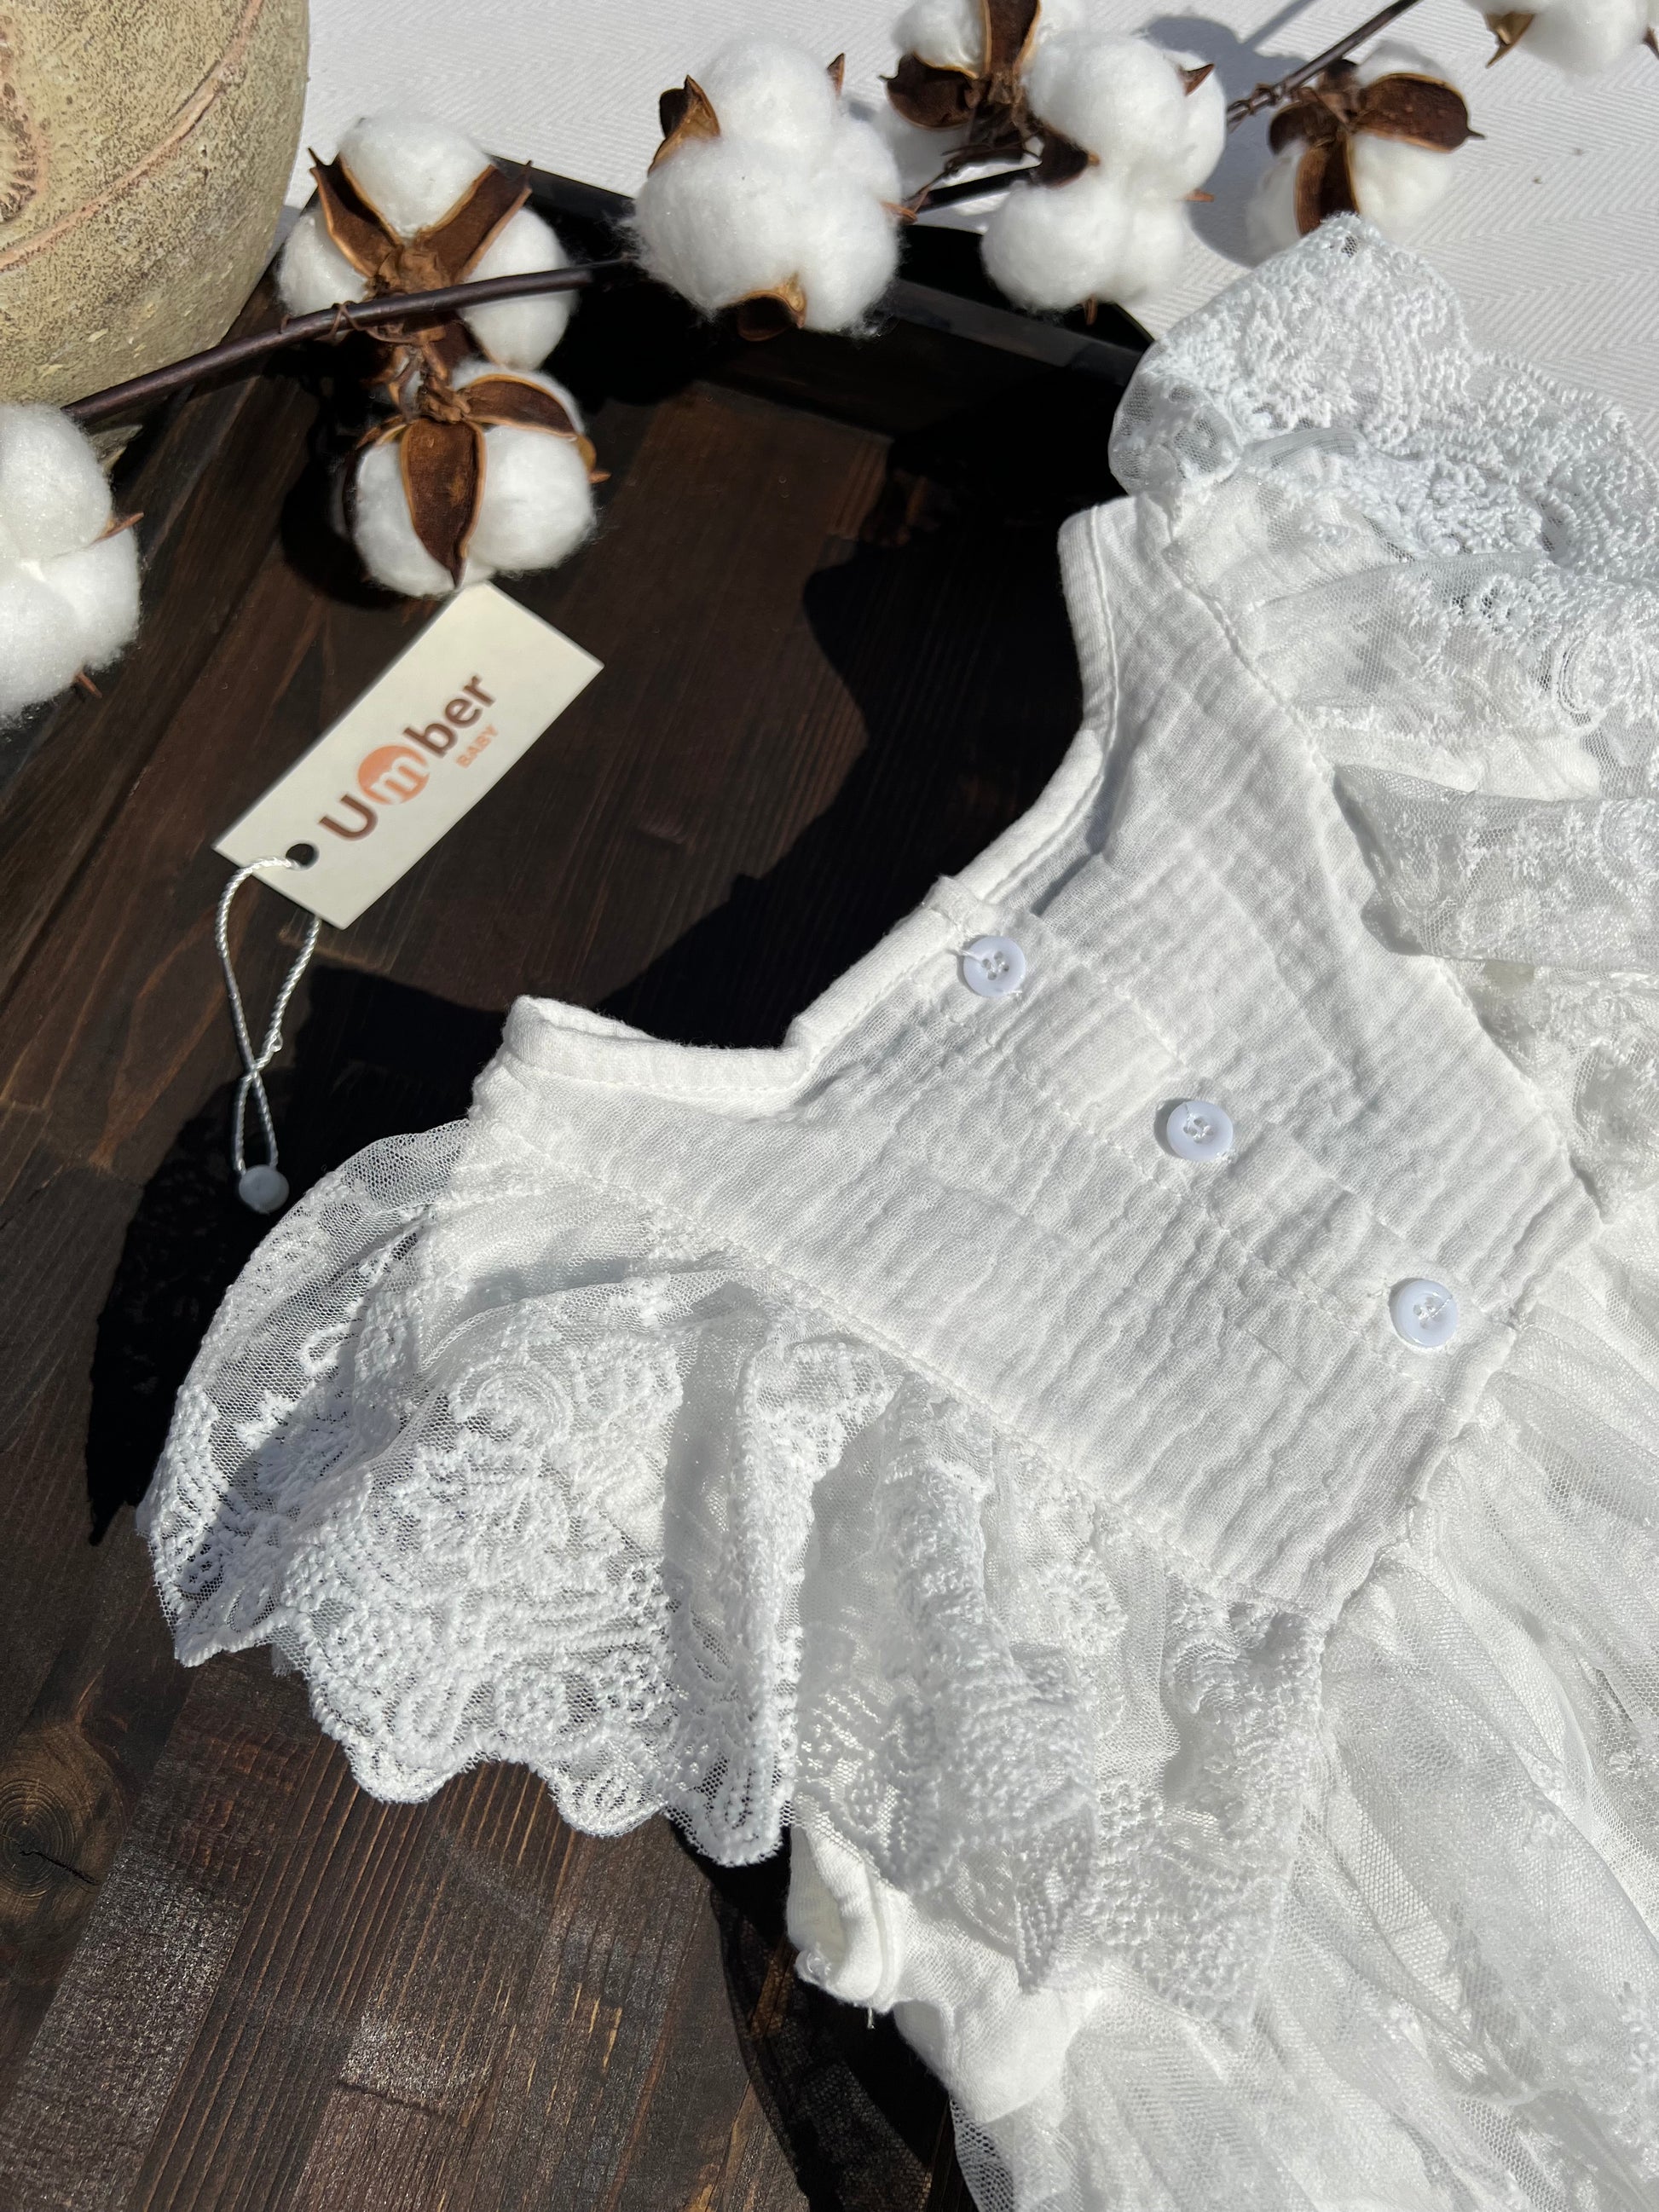 White Lace Ruffle Sleeve Baby Dress with Embroidered Flower Details with Three Buttons at the Back